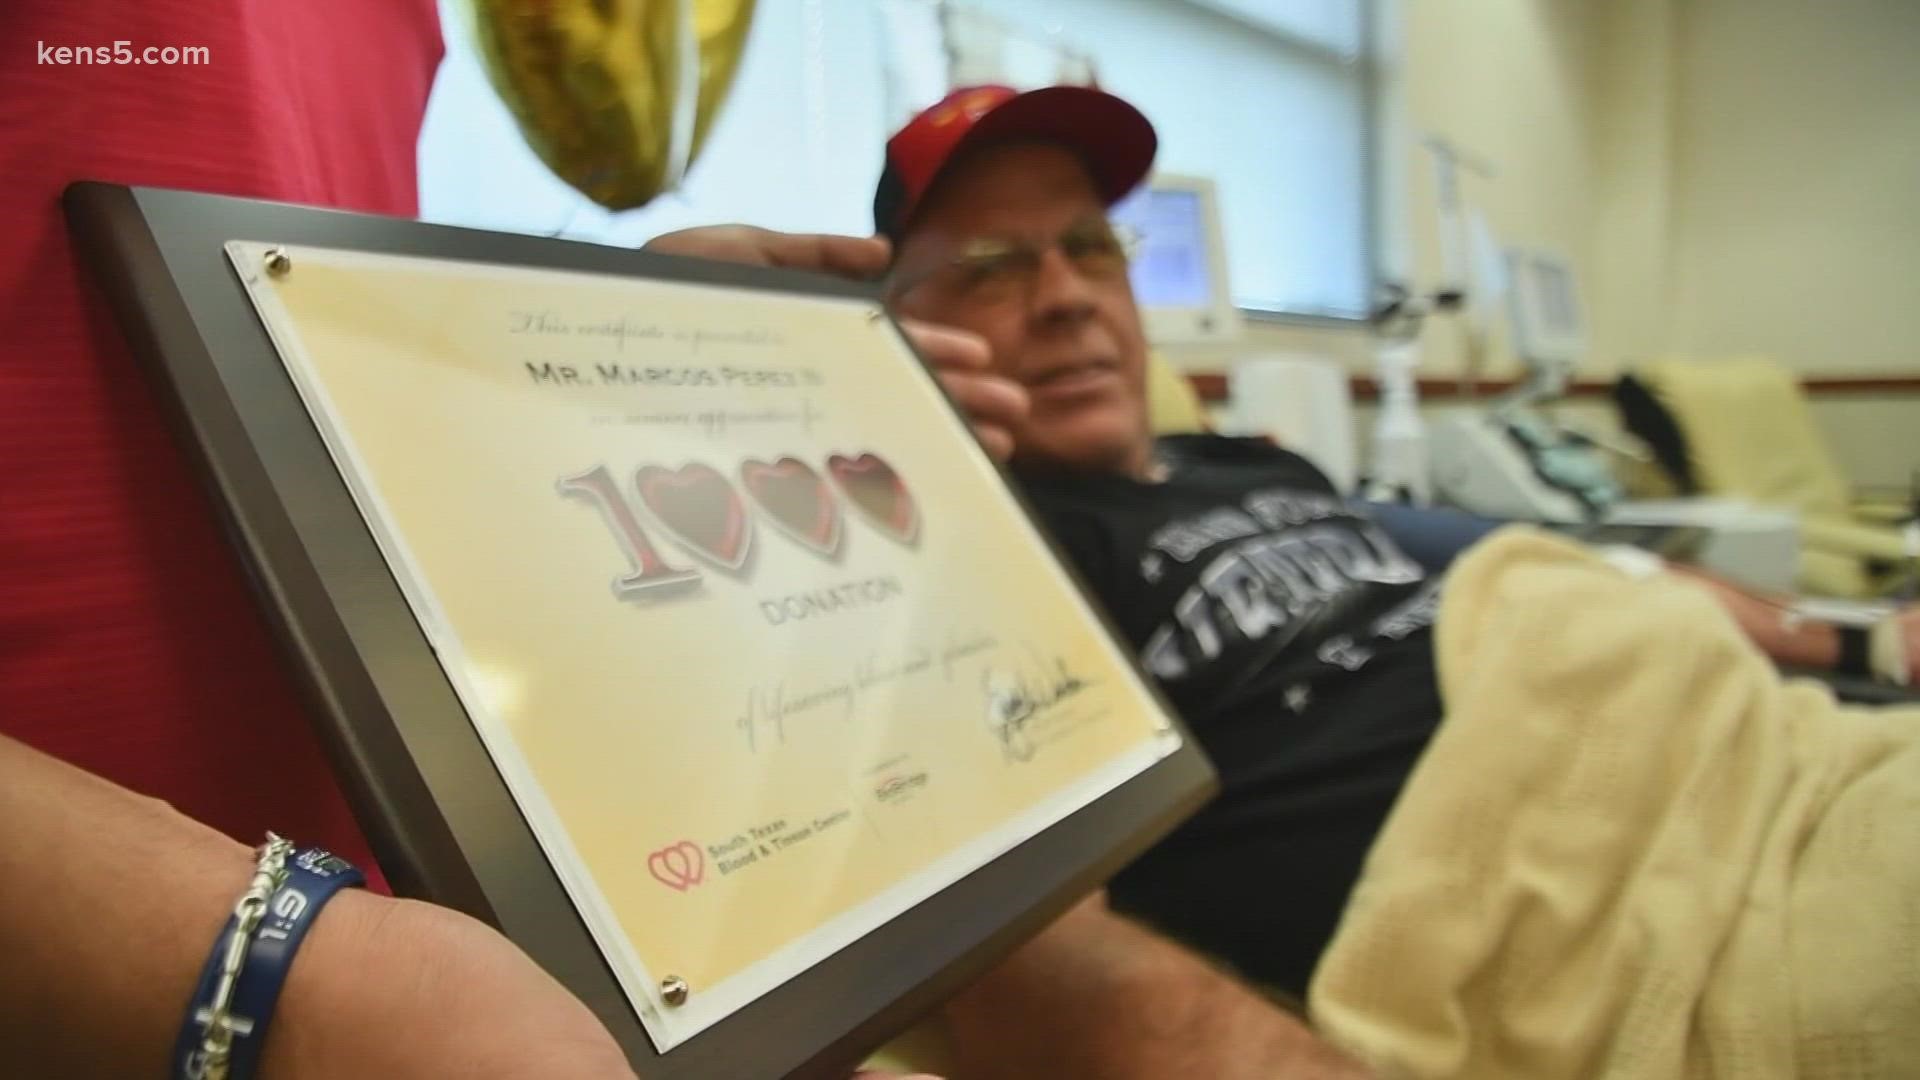 It took the 61-year-old 38 years donating regularly, amounting to 125 gallons of platelets.